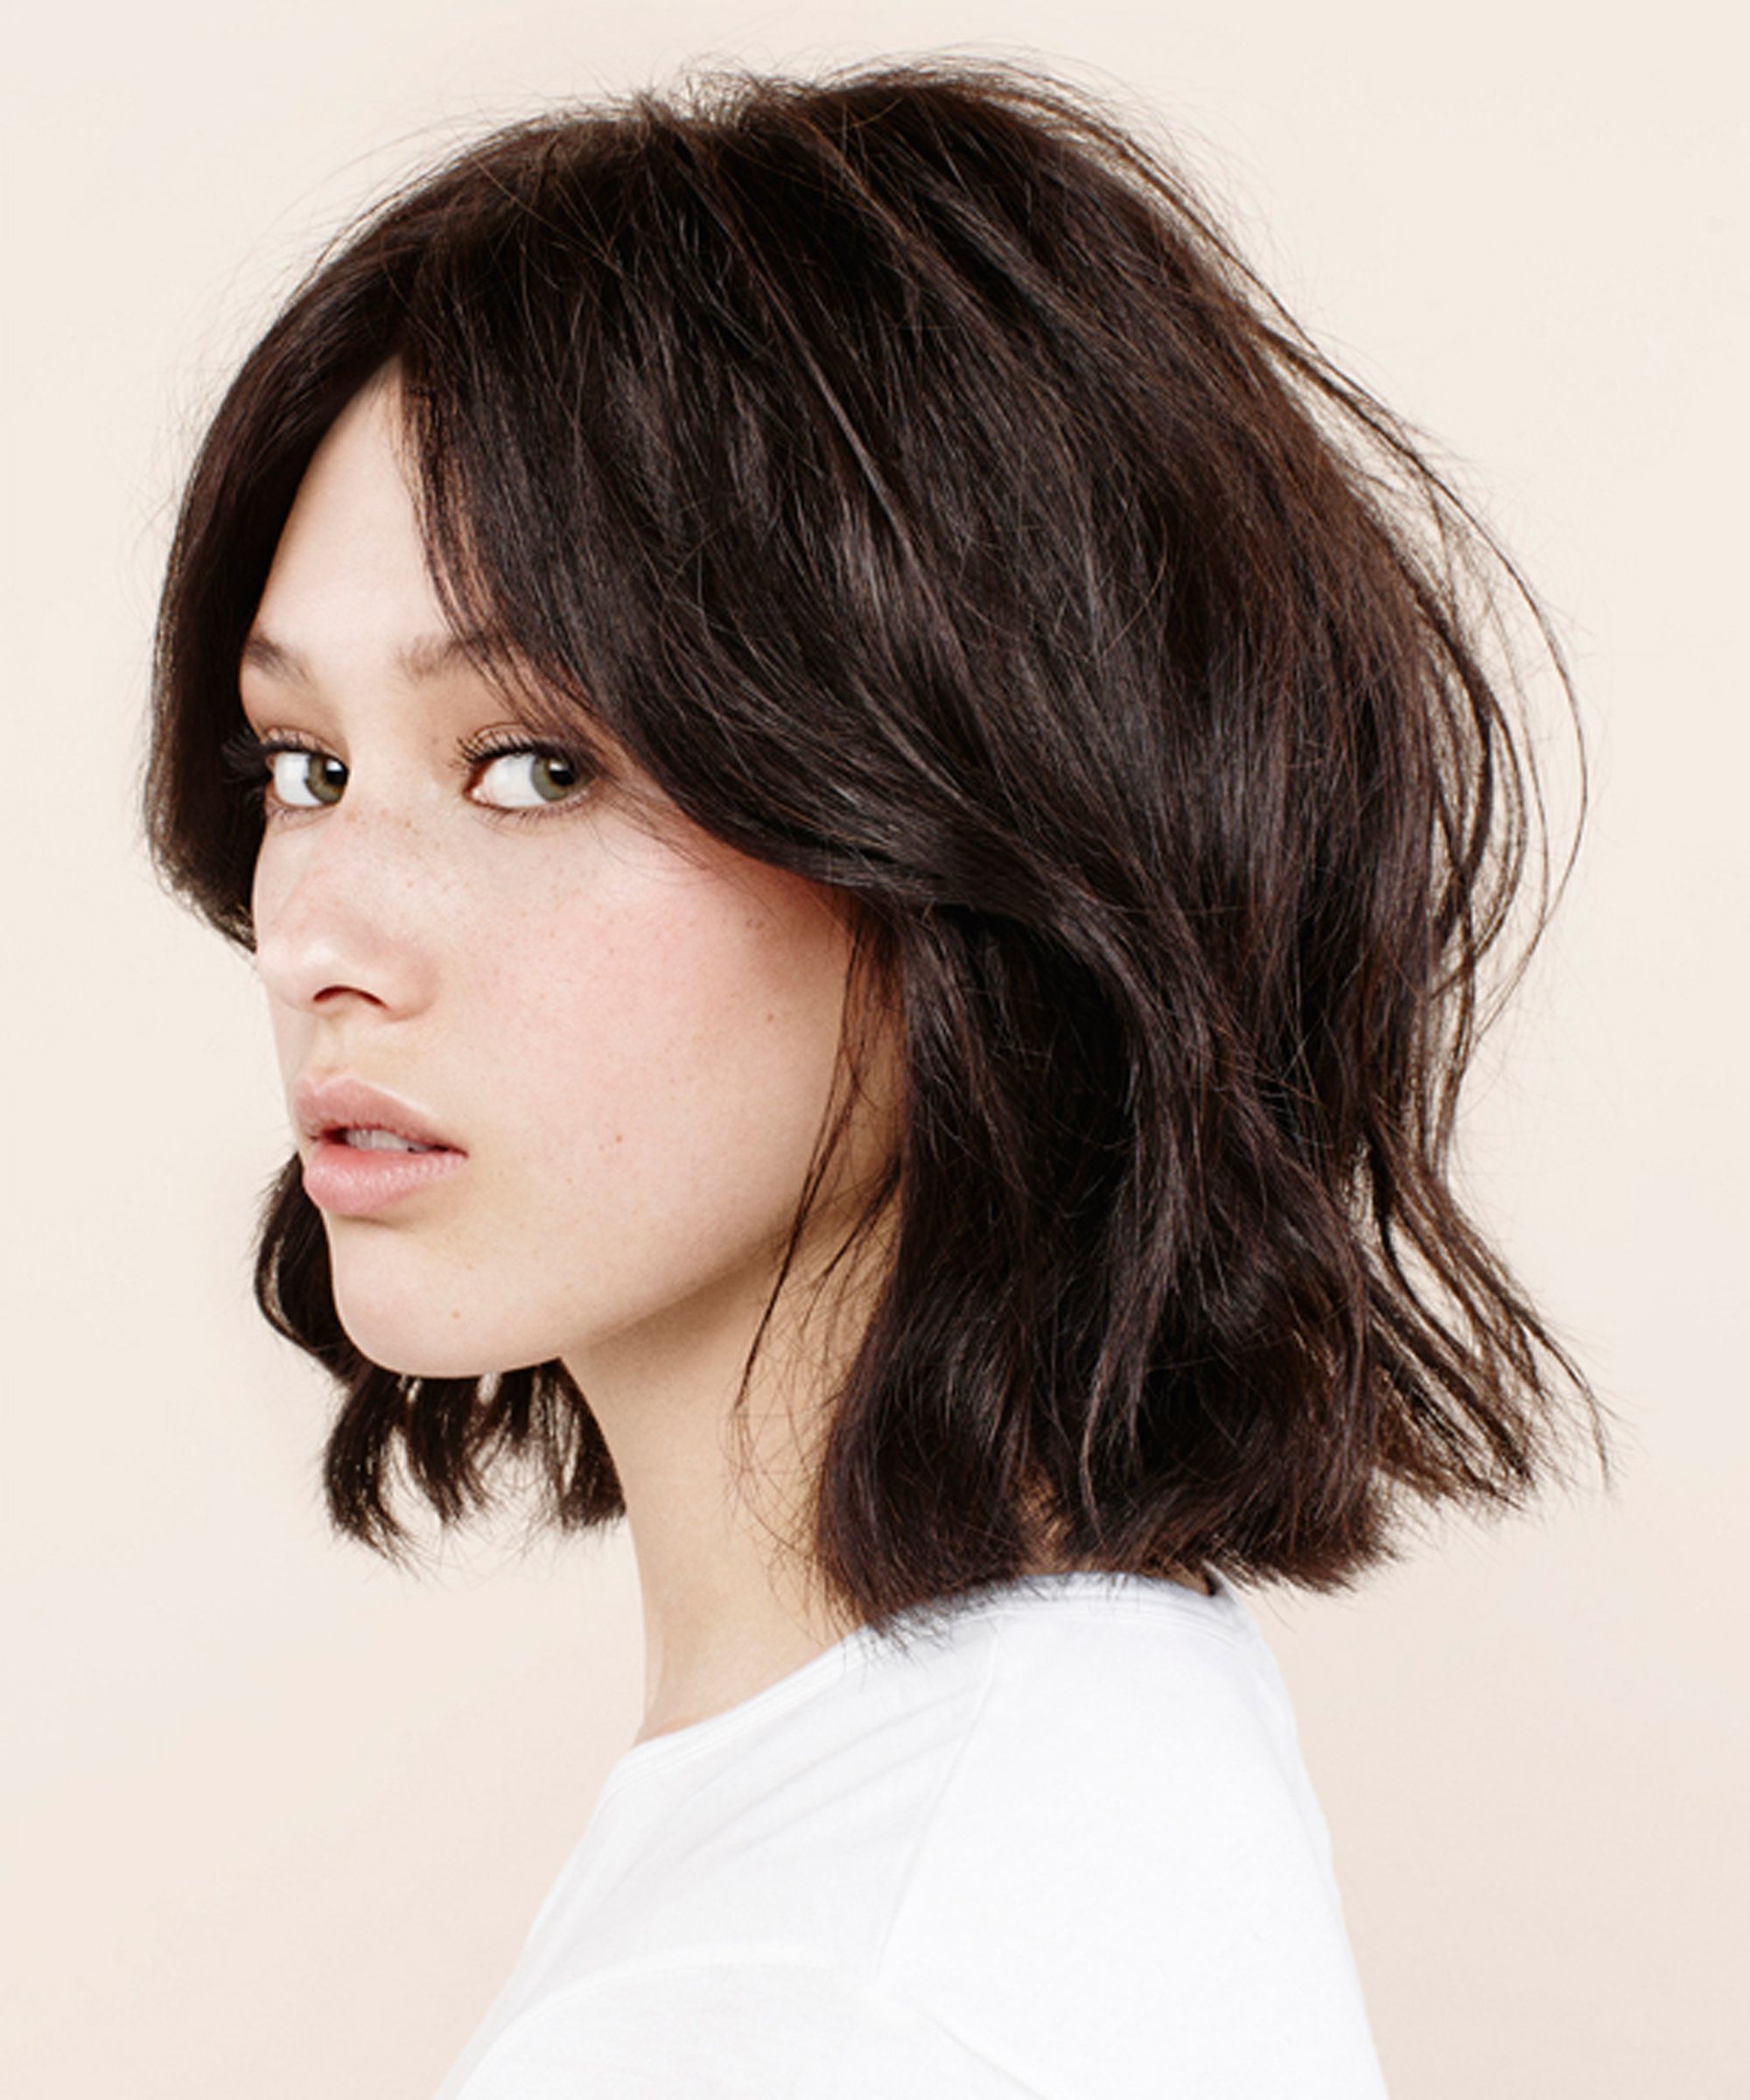 Newest Edgy Asymmetrical Medium Haircuts Intended For International Hair Trends, Bangs, Bob Haircuts (View 19 of 20)